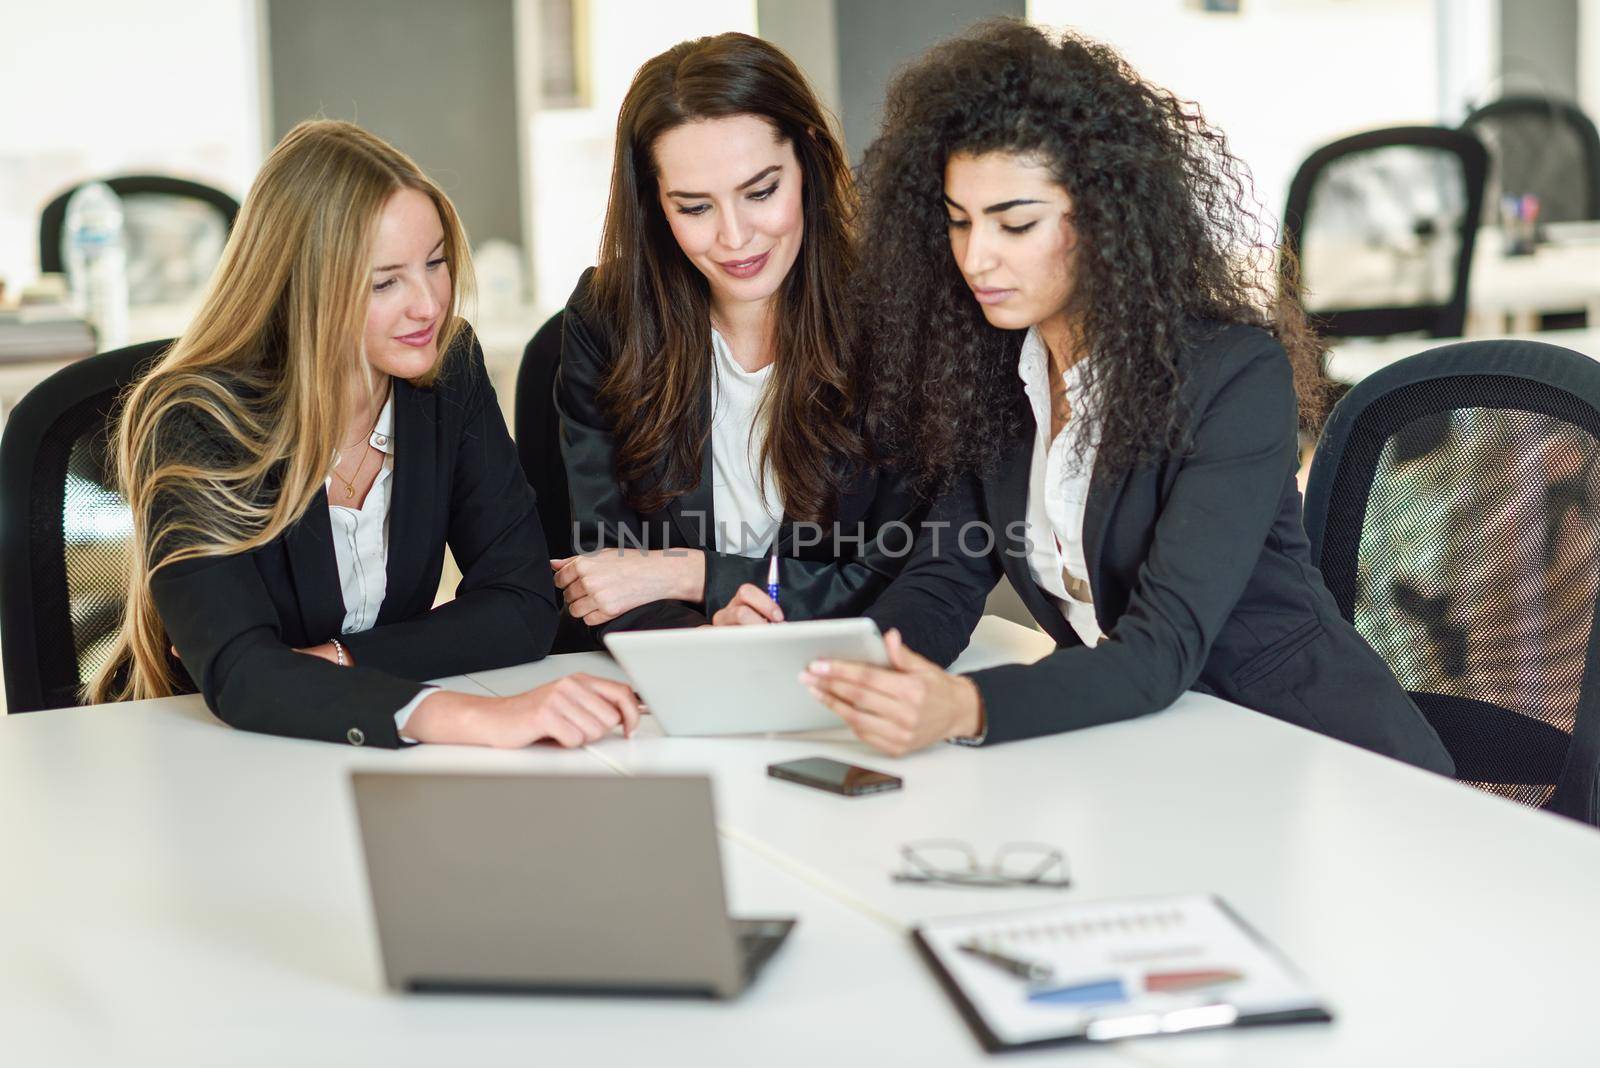 Three businesswomen working together in a modern office with white furniture. Teamwork concept. Caucasian, blonde, and muslim girls wearing suit. Multi-ethnic group of women